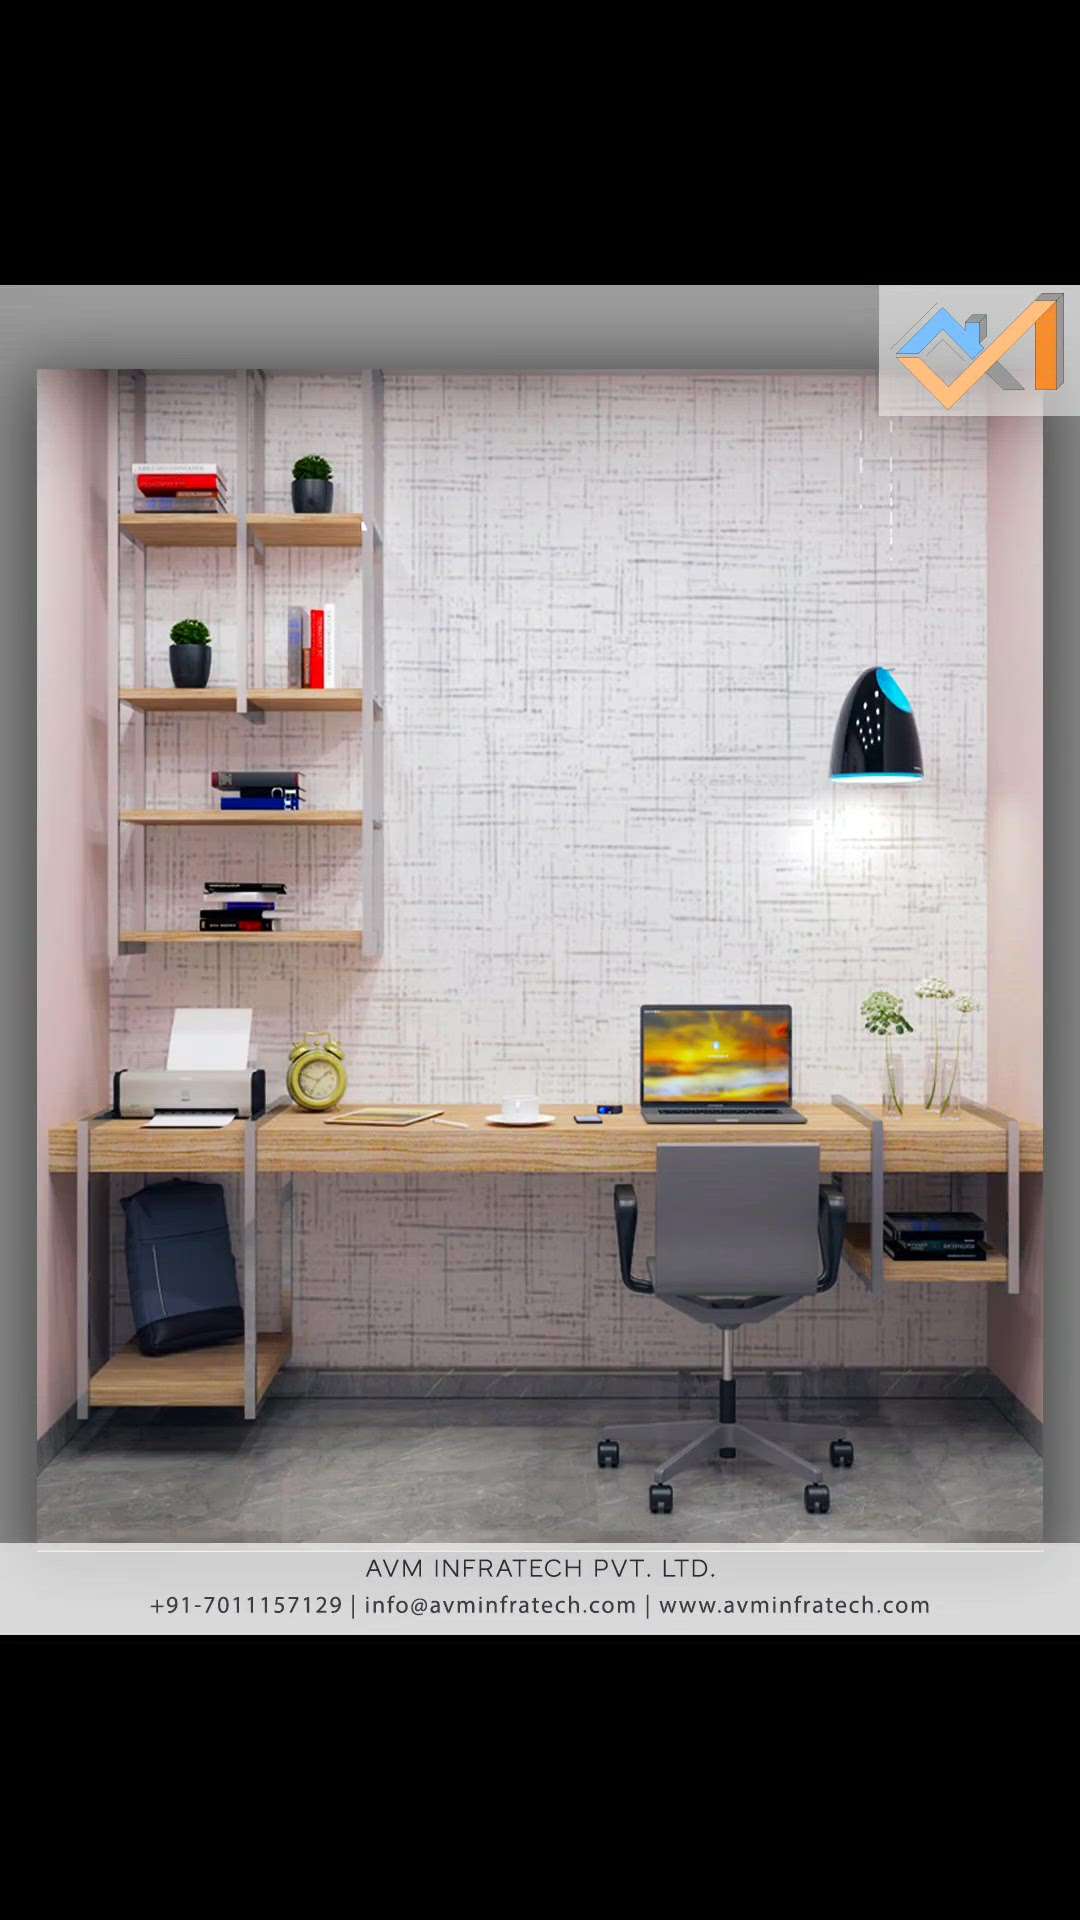 A customised working place at your house is a must have!


Follow us for more such amazing updates. 
.
.
#customised #customisedcovers #study #studygram #work #studytable #working #customisation #furniture #furnituredesign #furnituremakeover #furnituremaker #avminfratech #renovation #chairs #chair